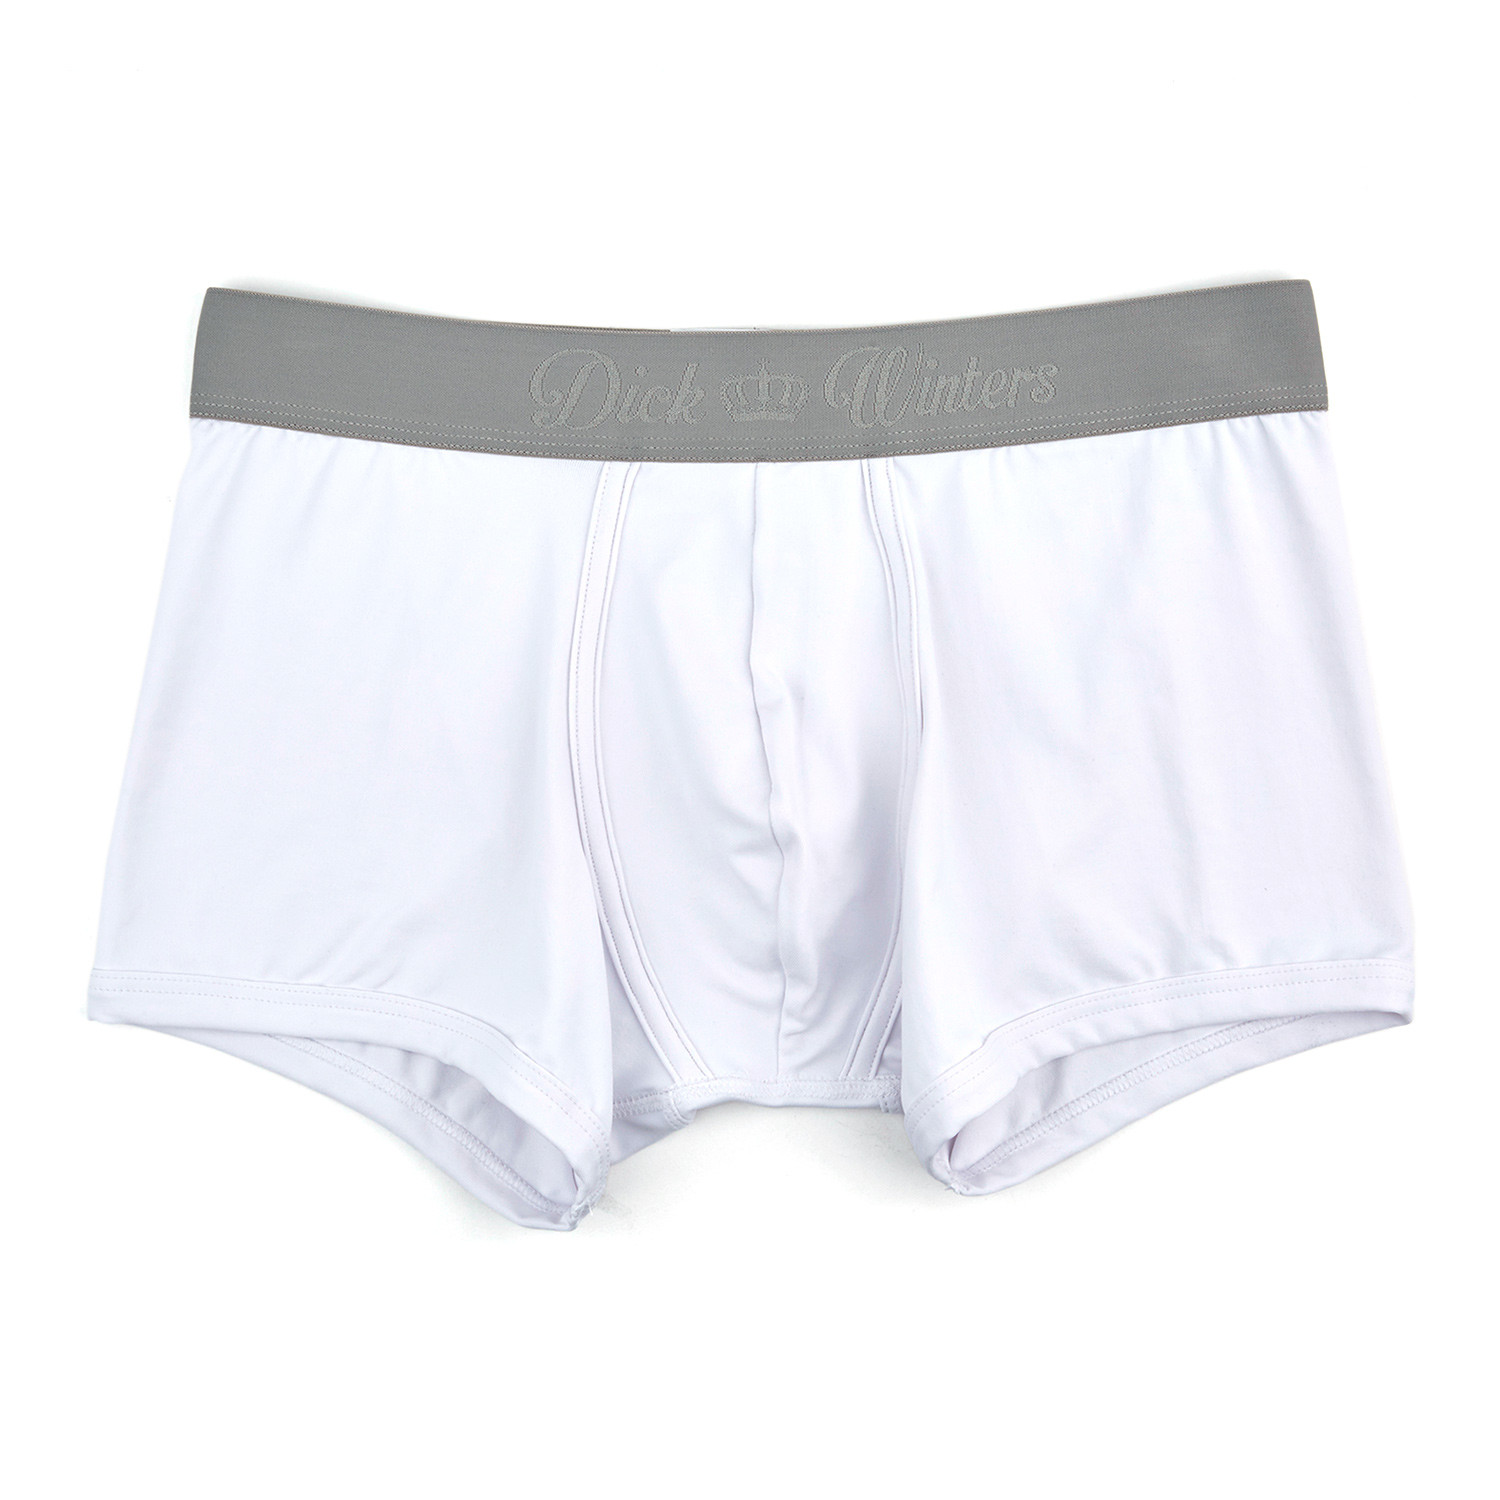 Old Dick Boxer Short // White (S) - Dick Winters - Touch of Modern